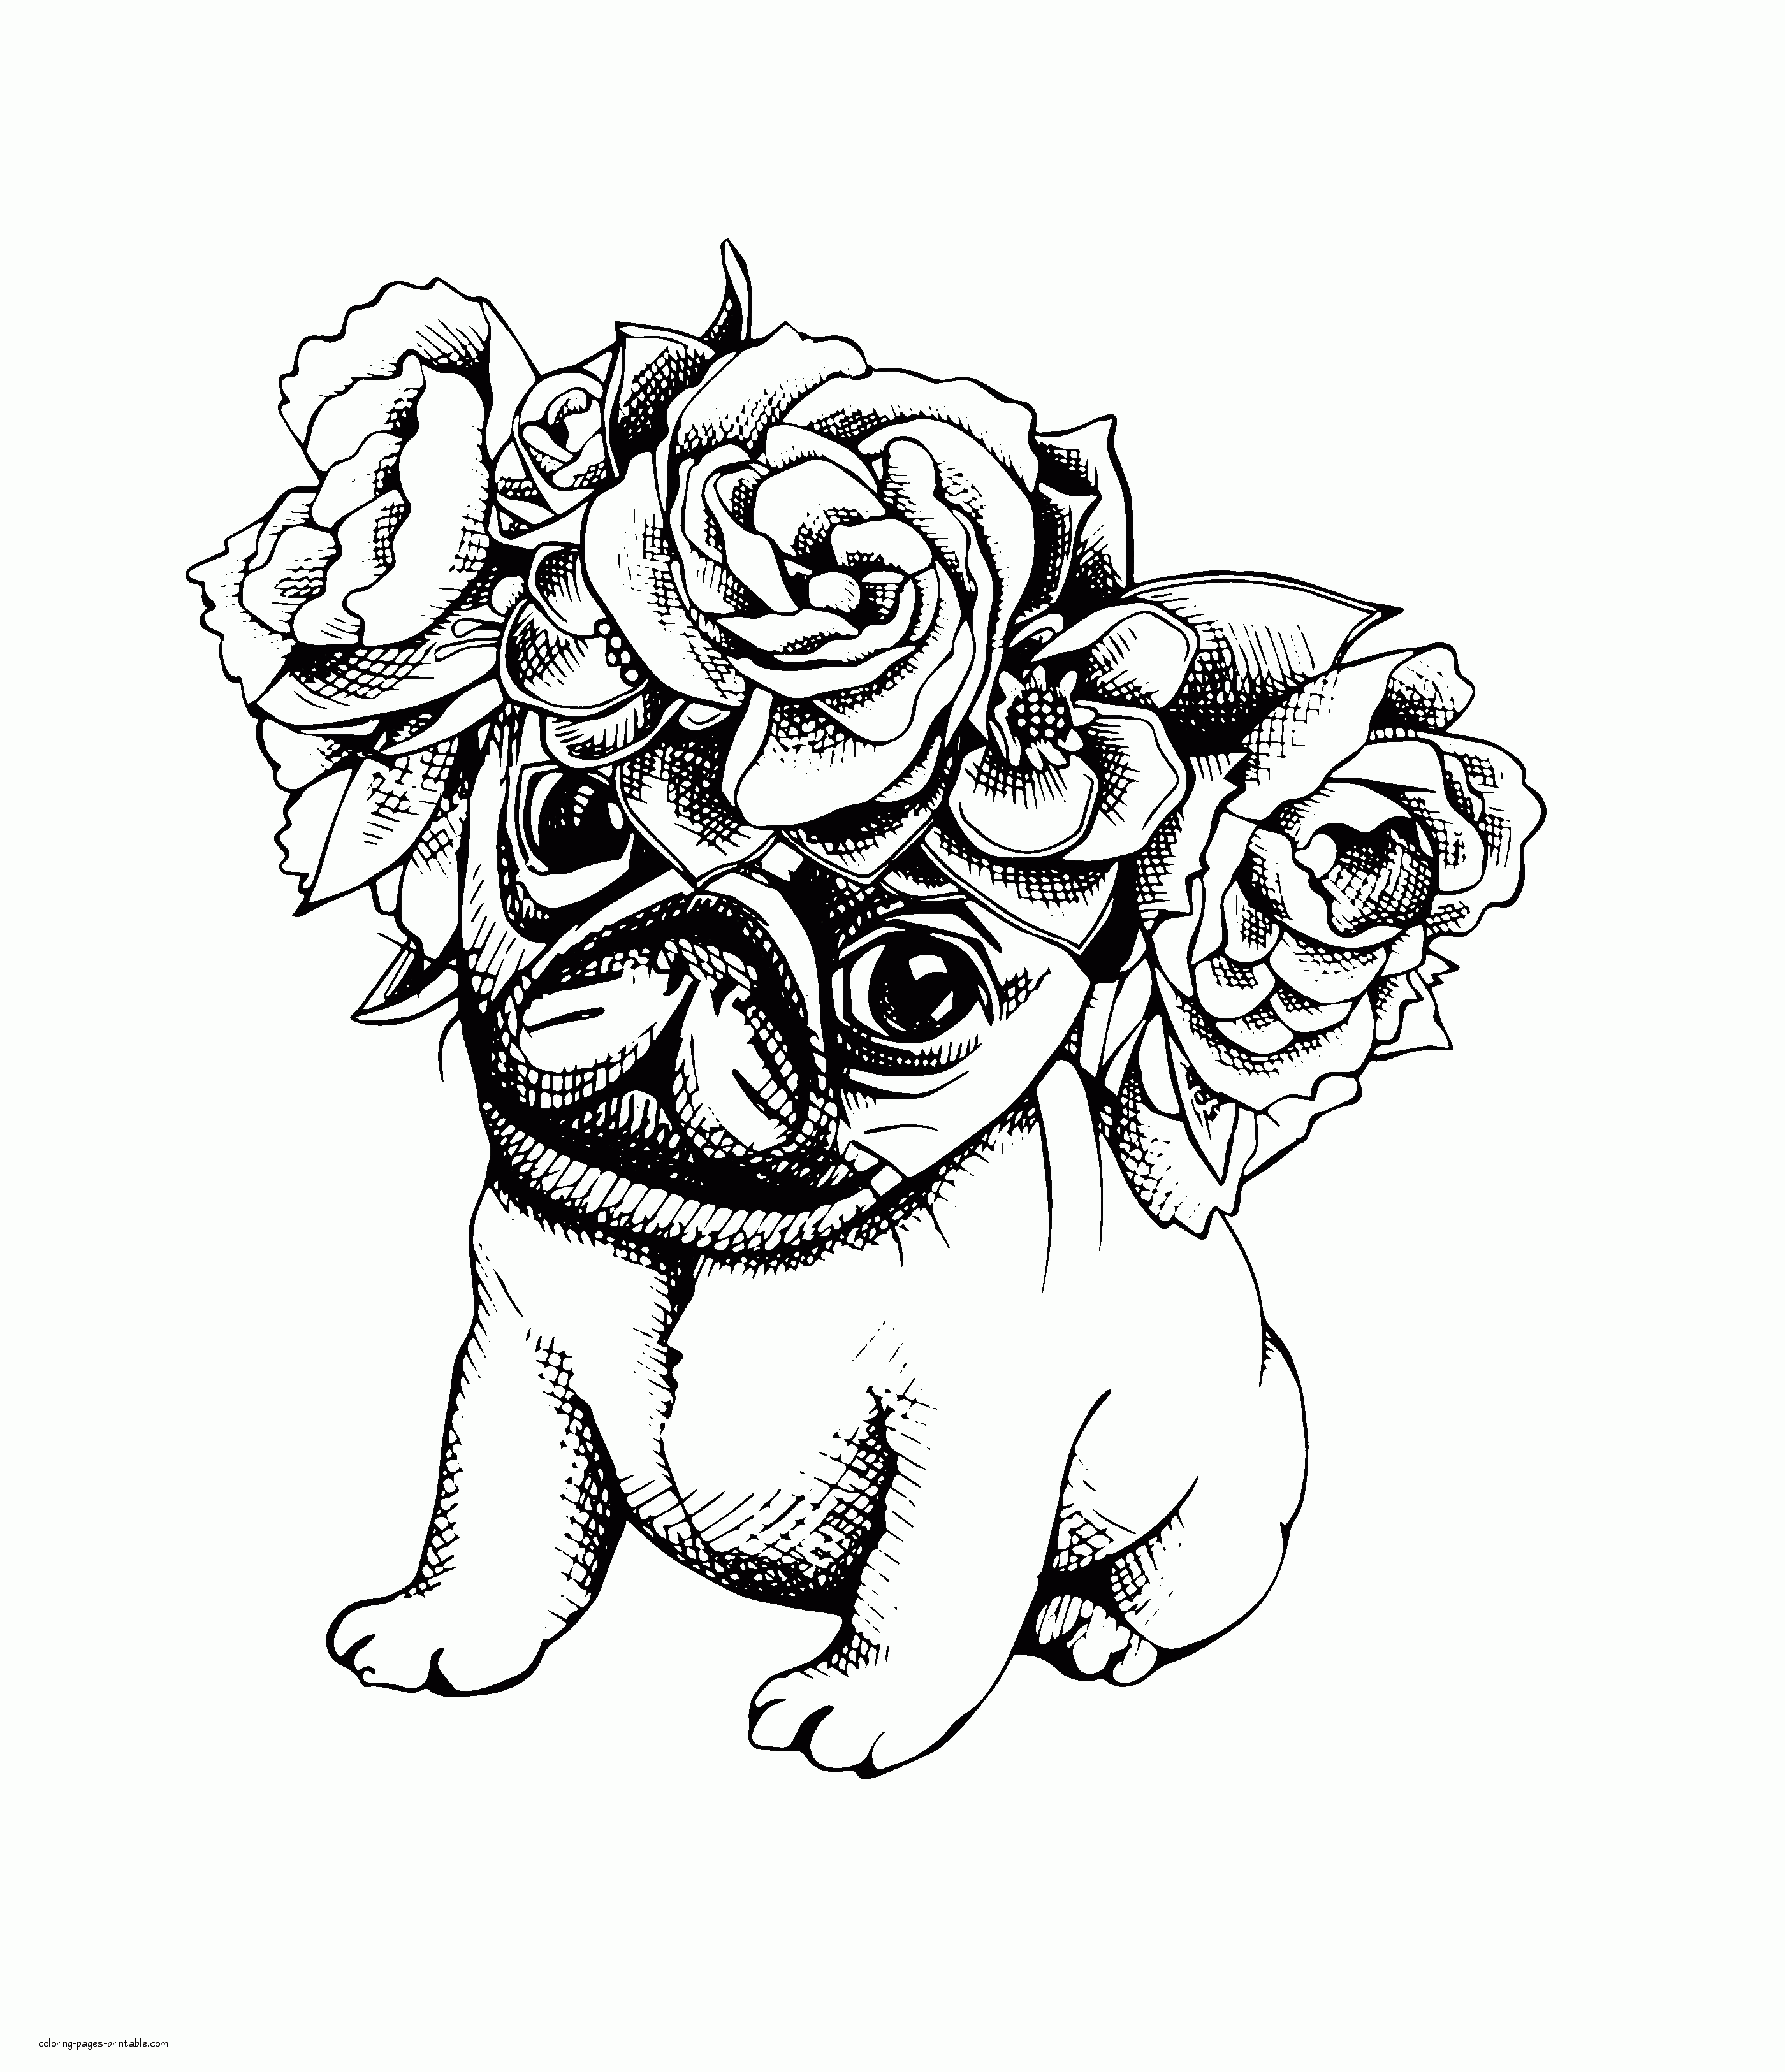 Download Animal Coloring Pages For Adults. Puppy || COLORING-PAGES ...